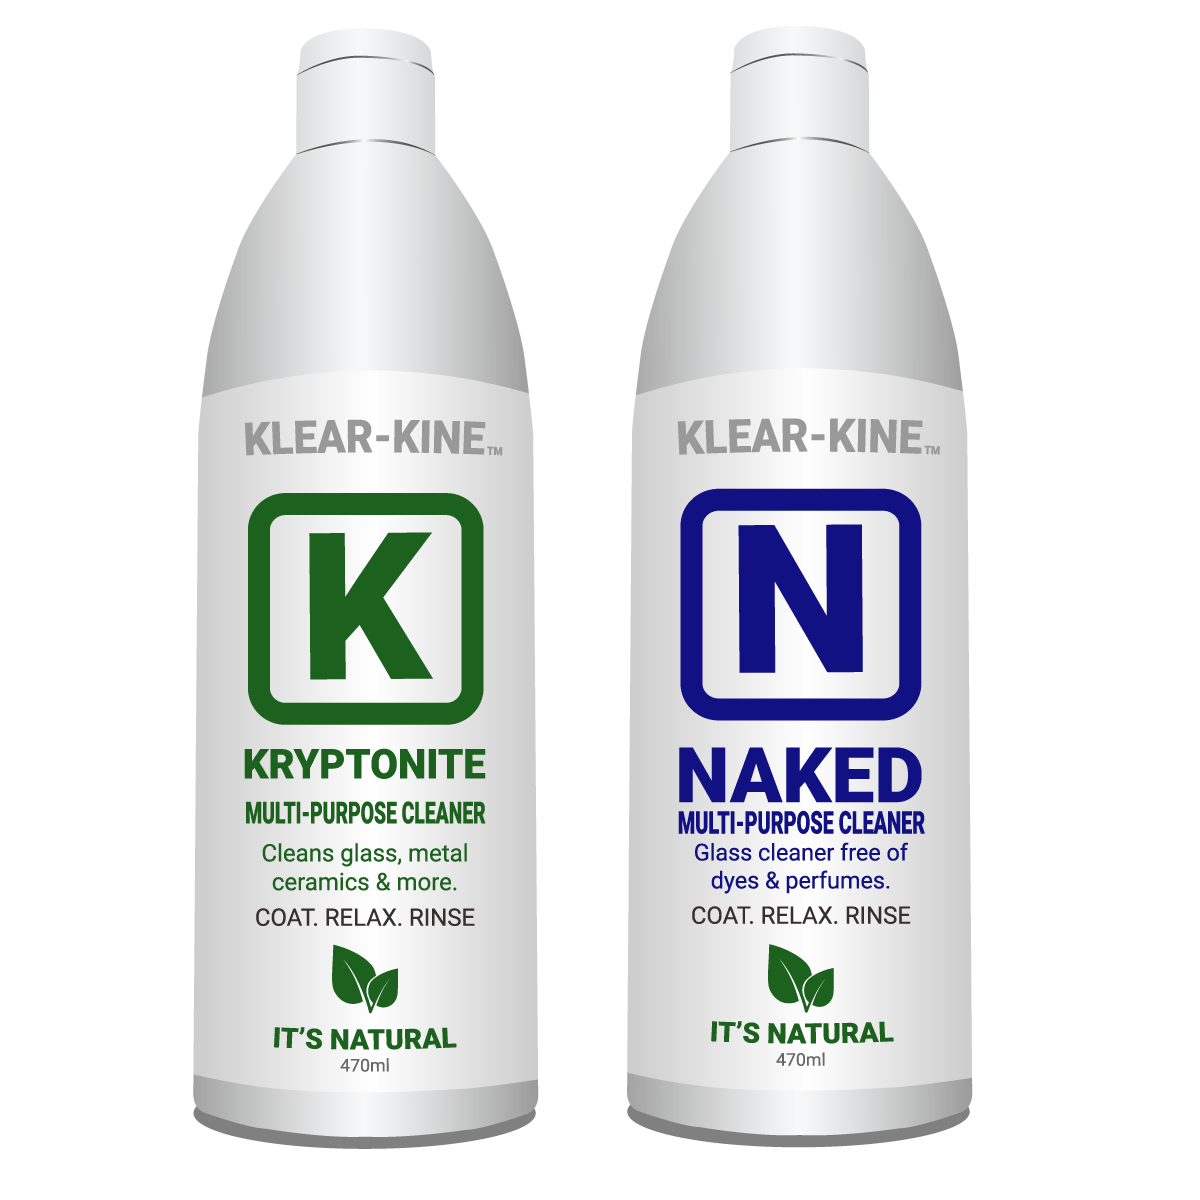 KLEAR Kryptonite Naked bong and pipe cleaning solution. Best formula420 bong cleaning solution kryptonite coats the glass for best results 